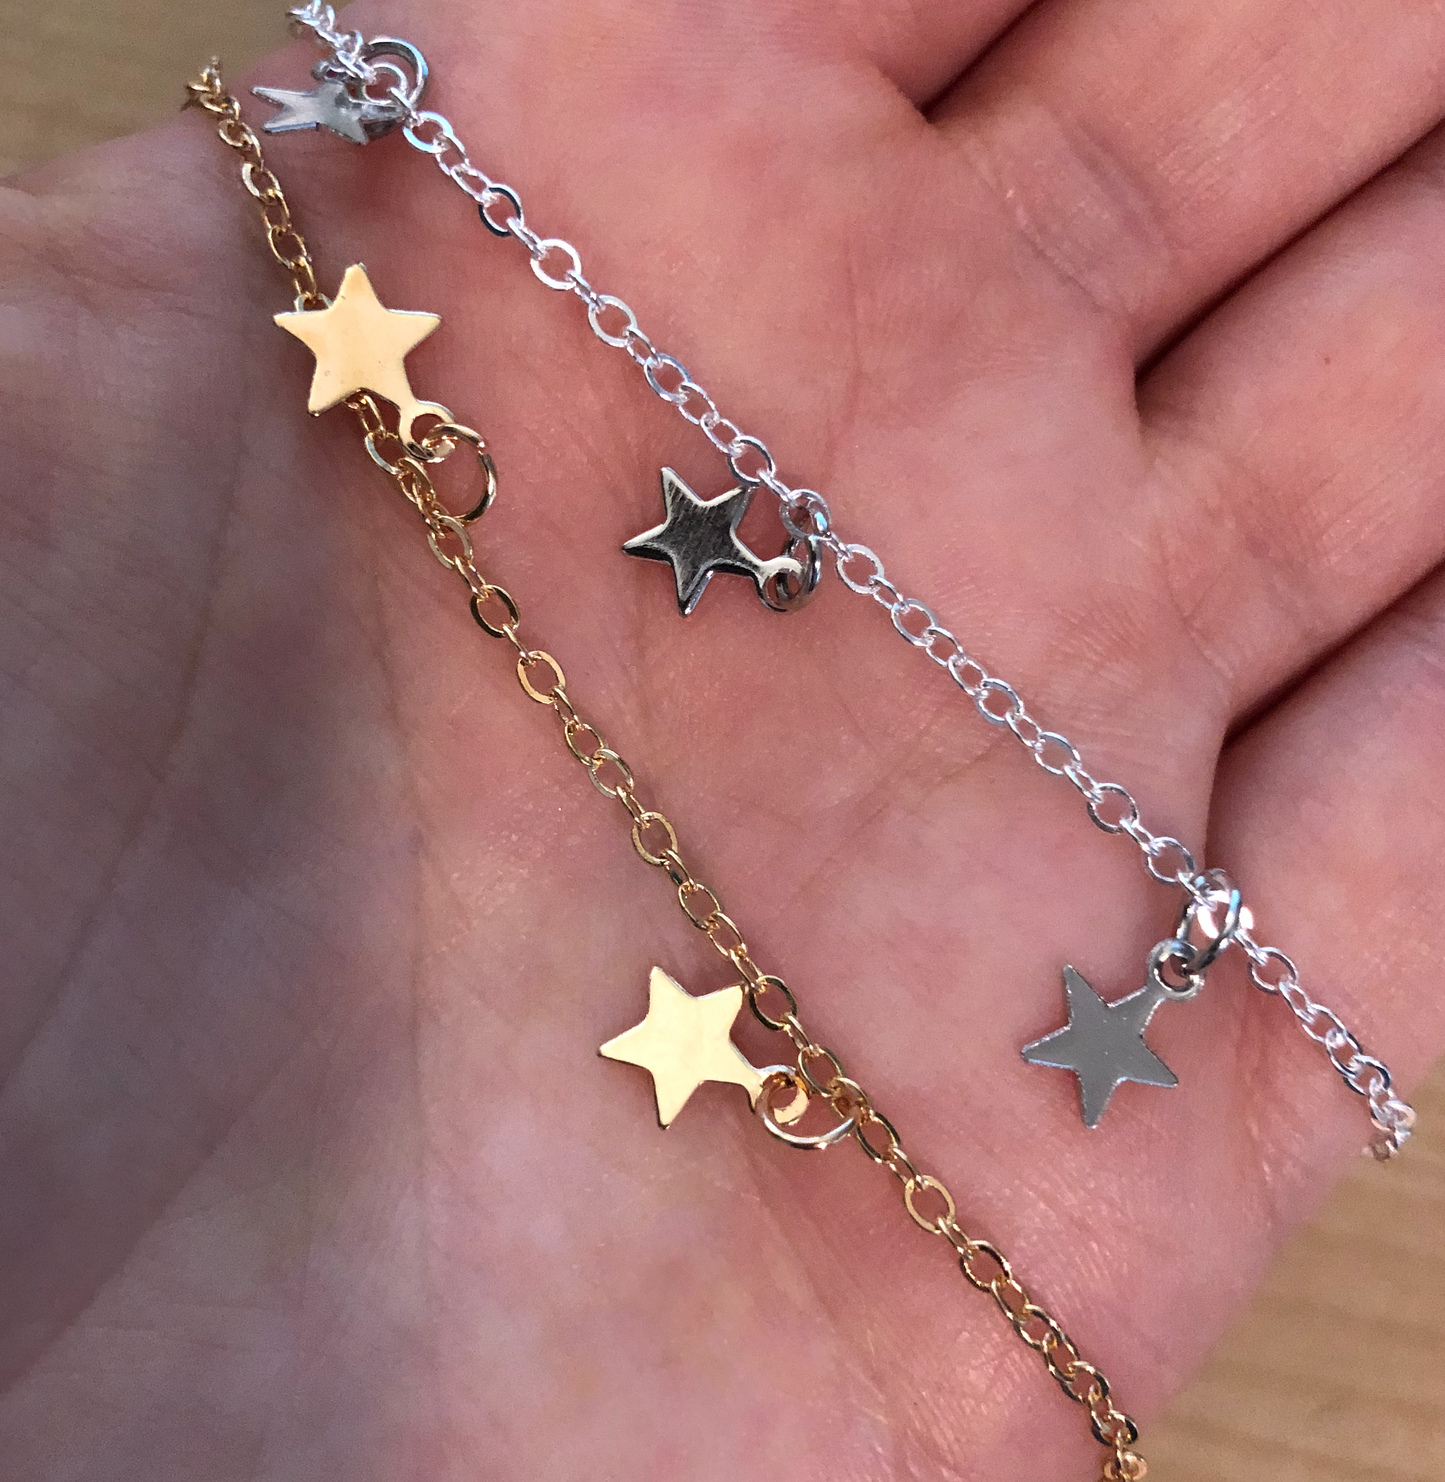 Star Anklet Bracelets in Silver and Gold